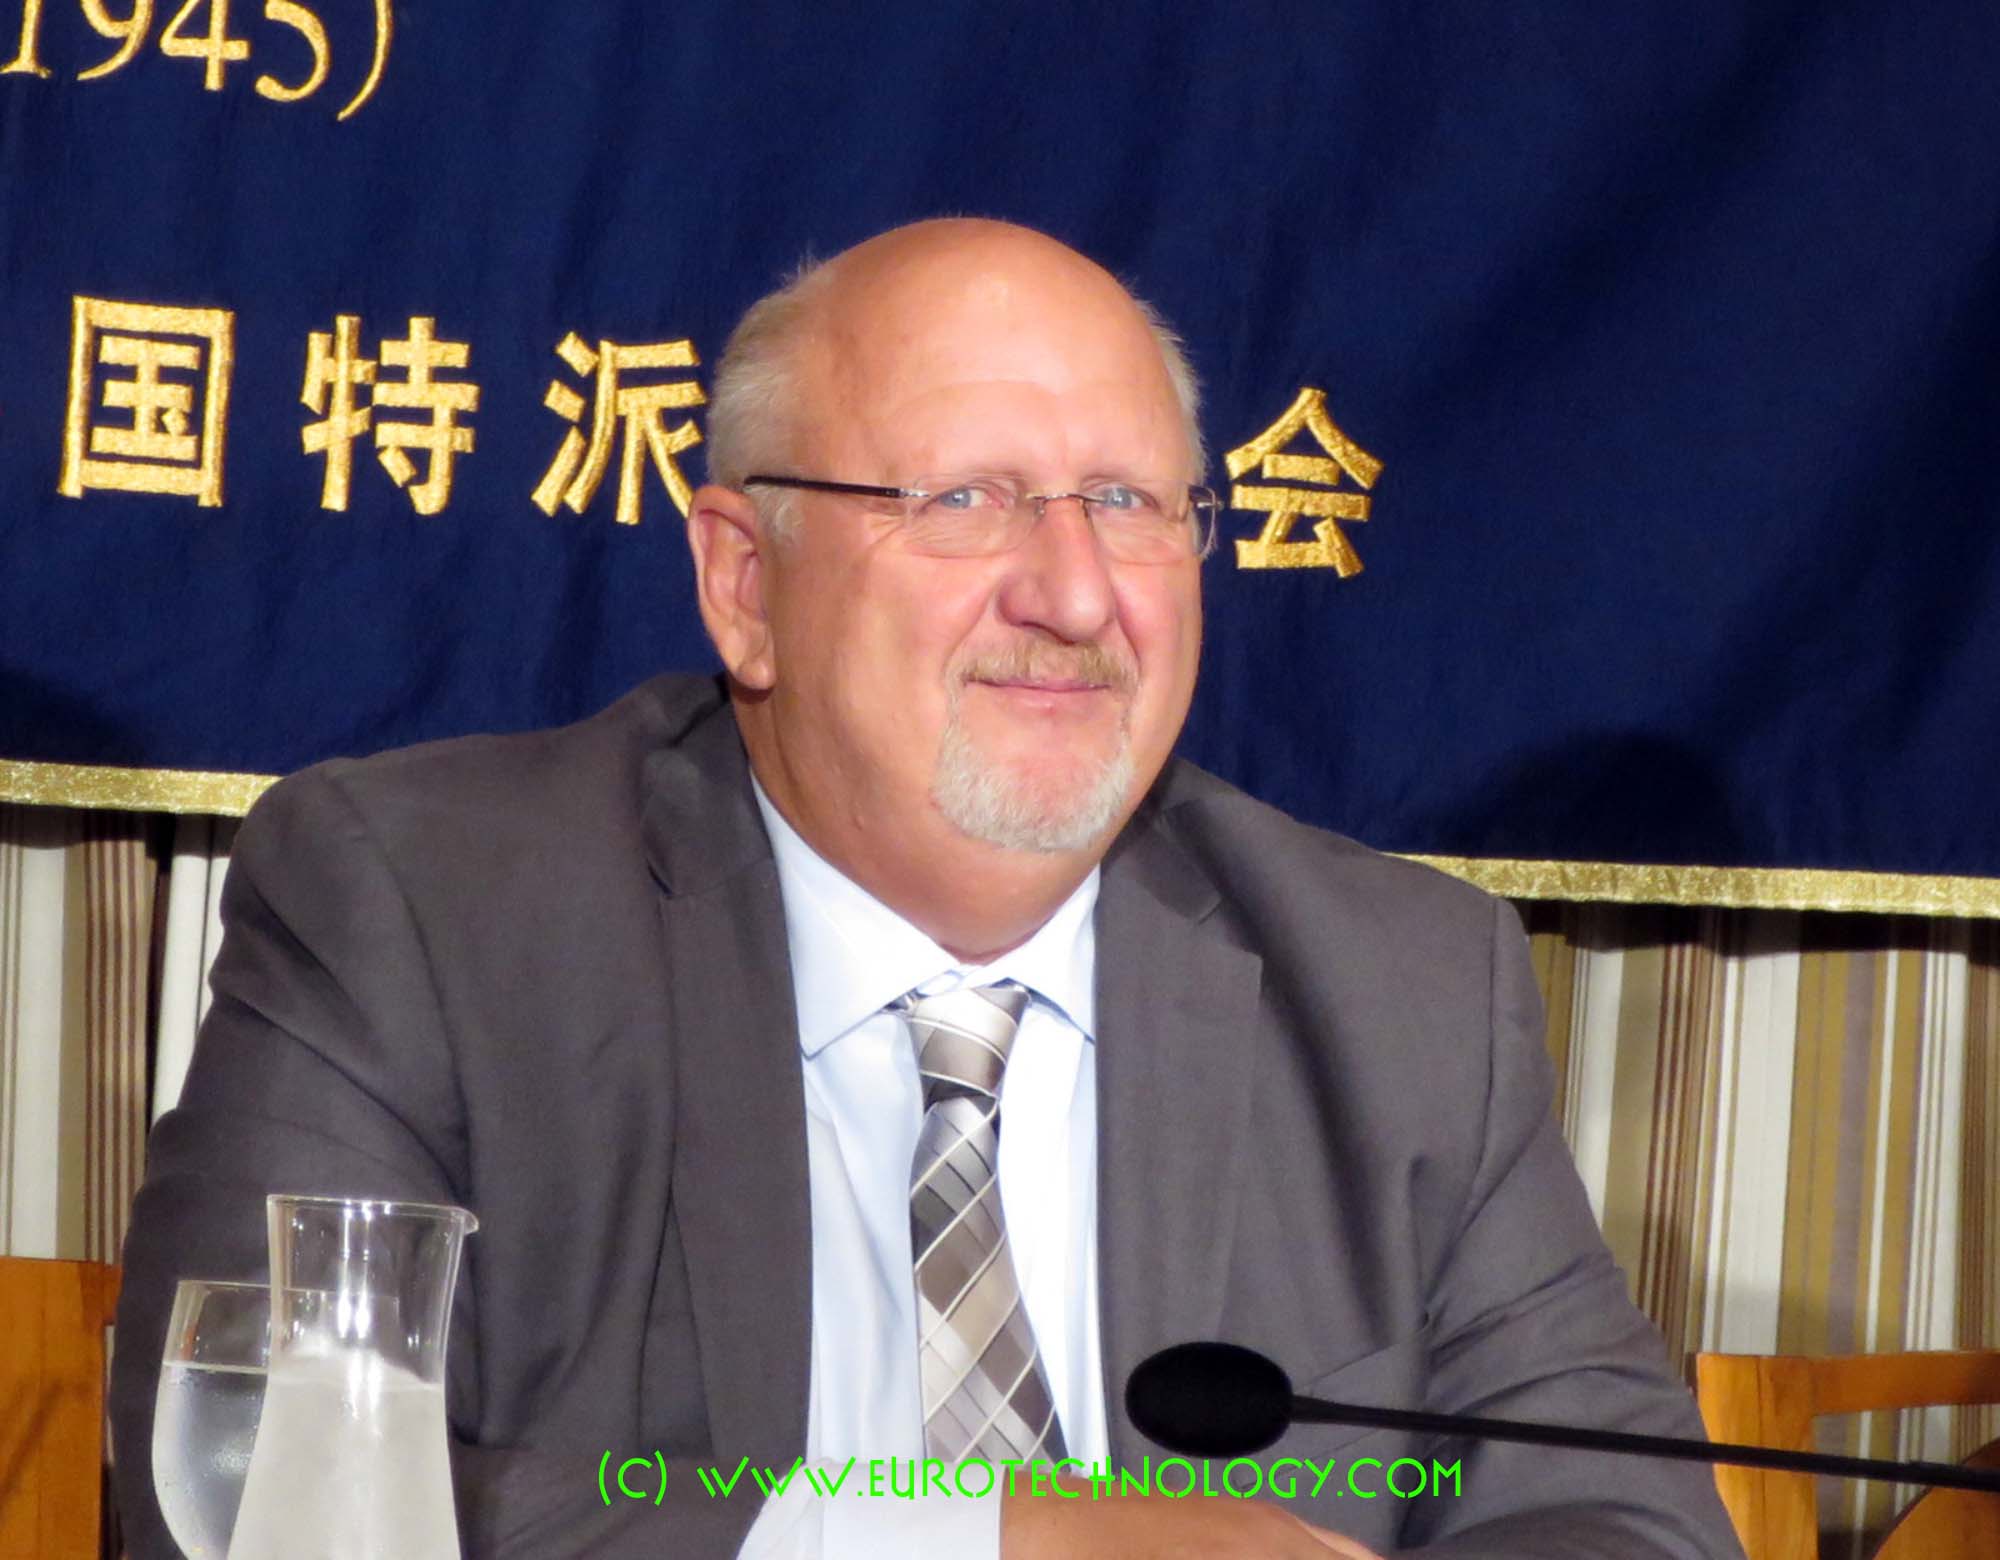 Japan nuclear safety – Dr. Charles “Chuck” Casto’s view and lessons learnt